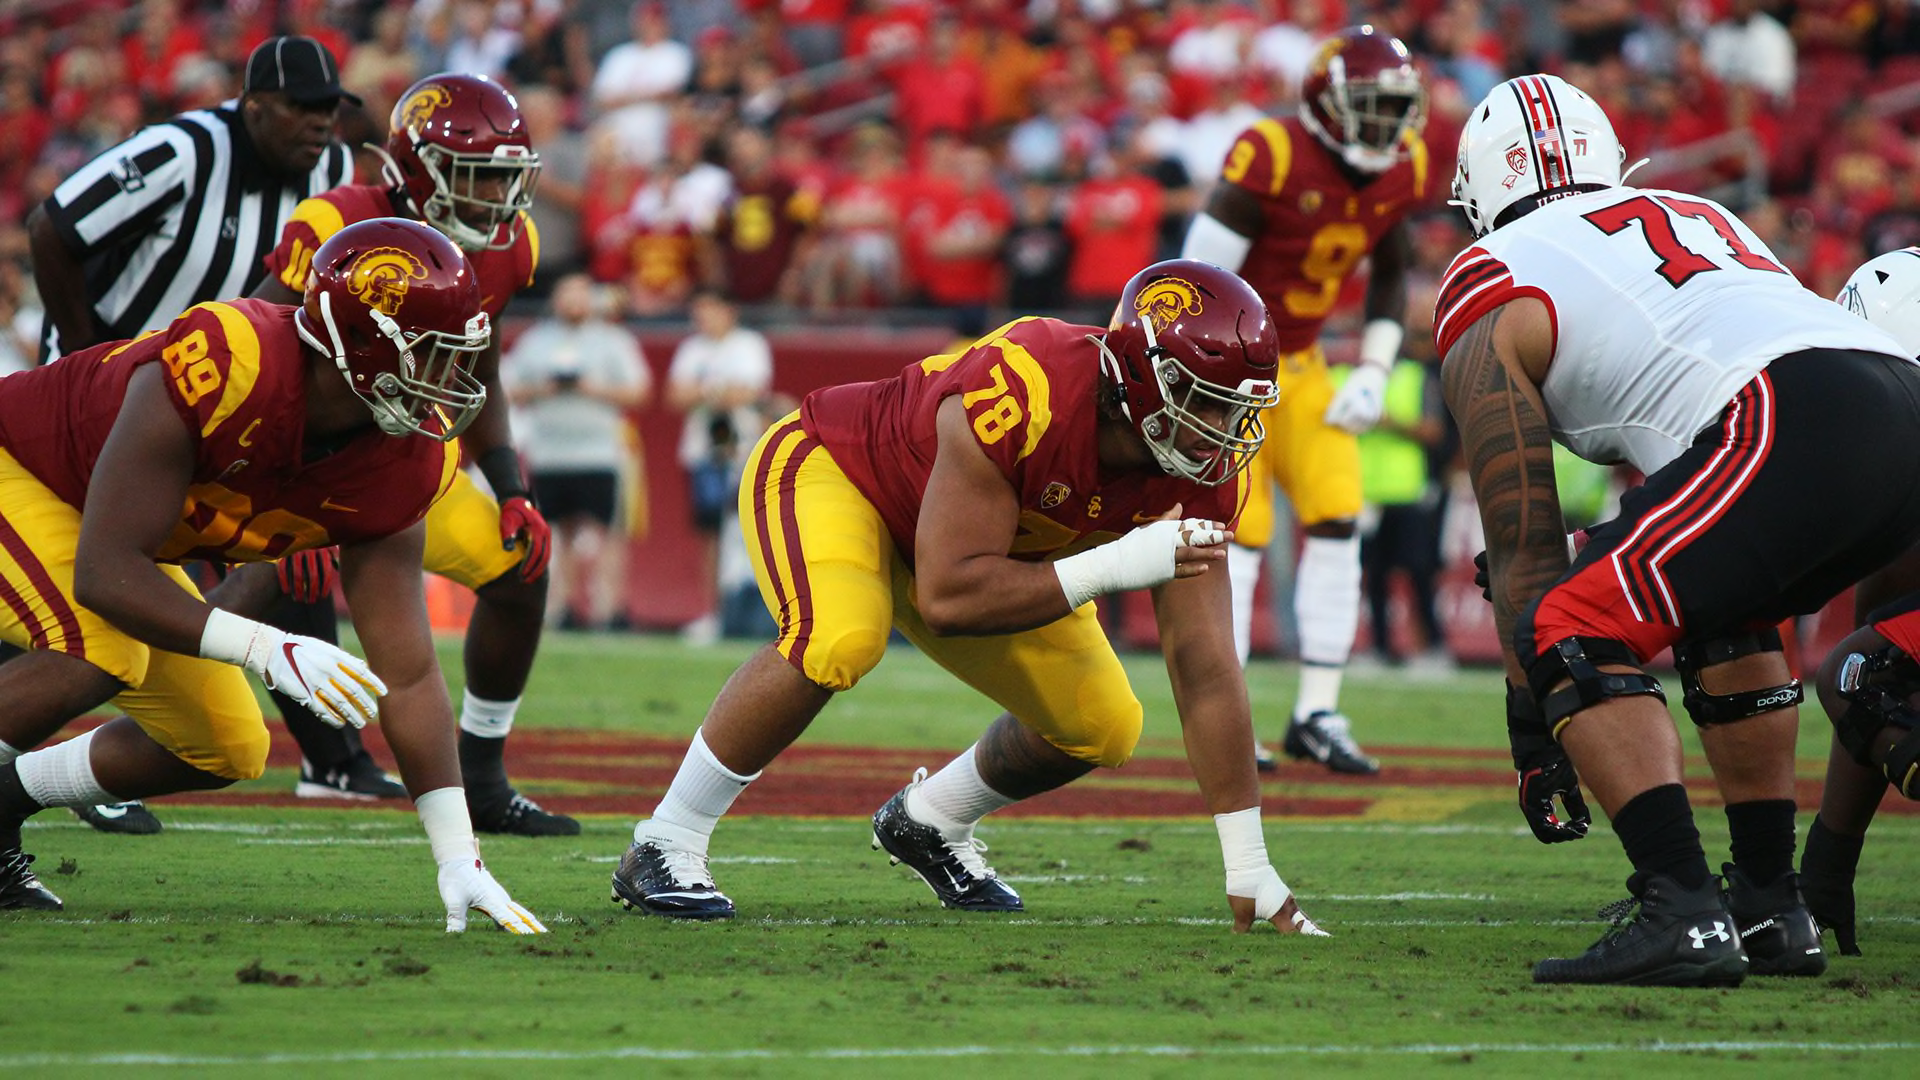 USC vs. Washington preview 2019: Which units have the edge? - Page 4